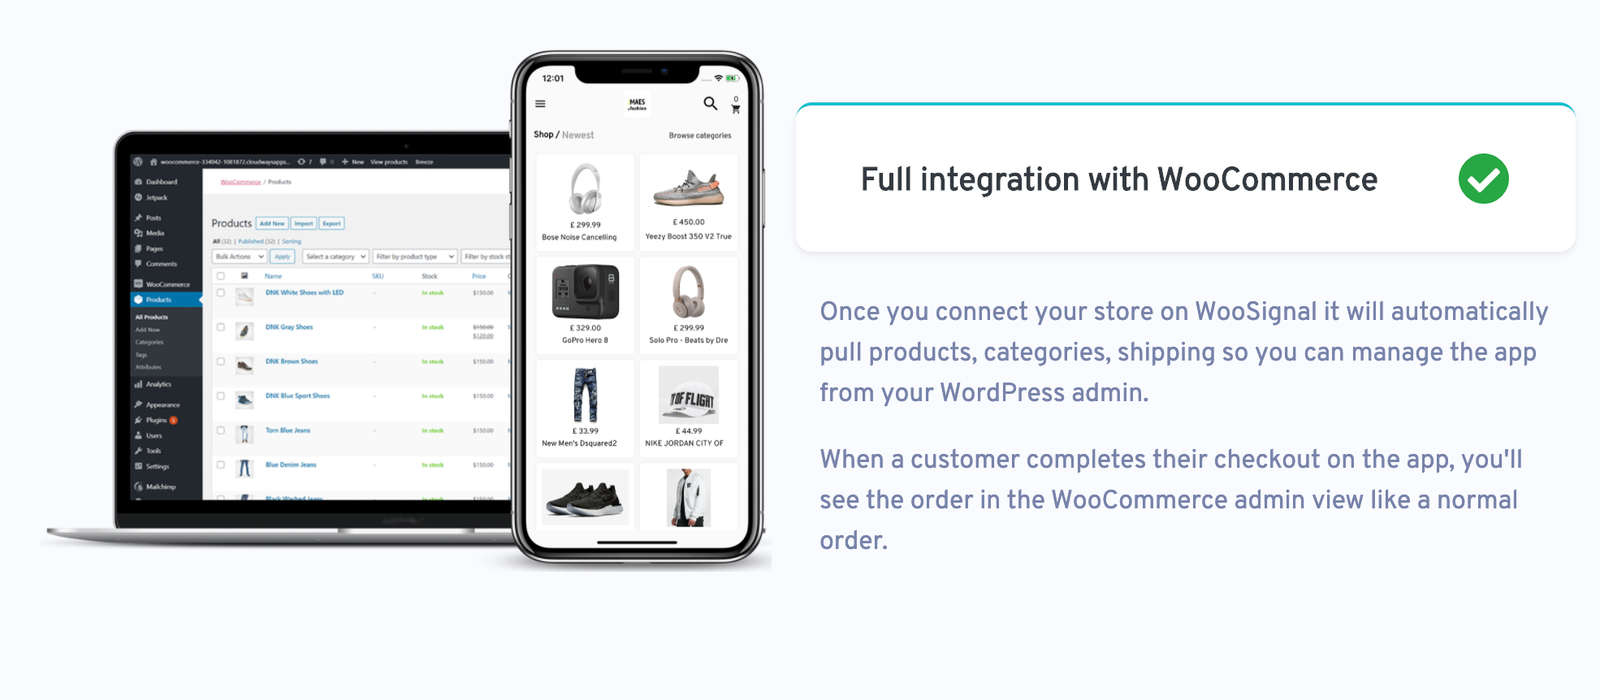 Flutter WooCommerce App Label StoreMax For IOS and Android Stripe - 3